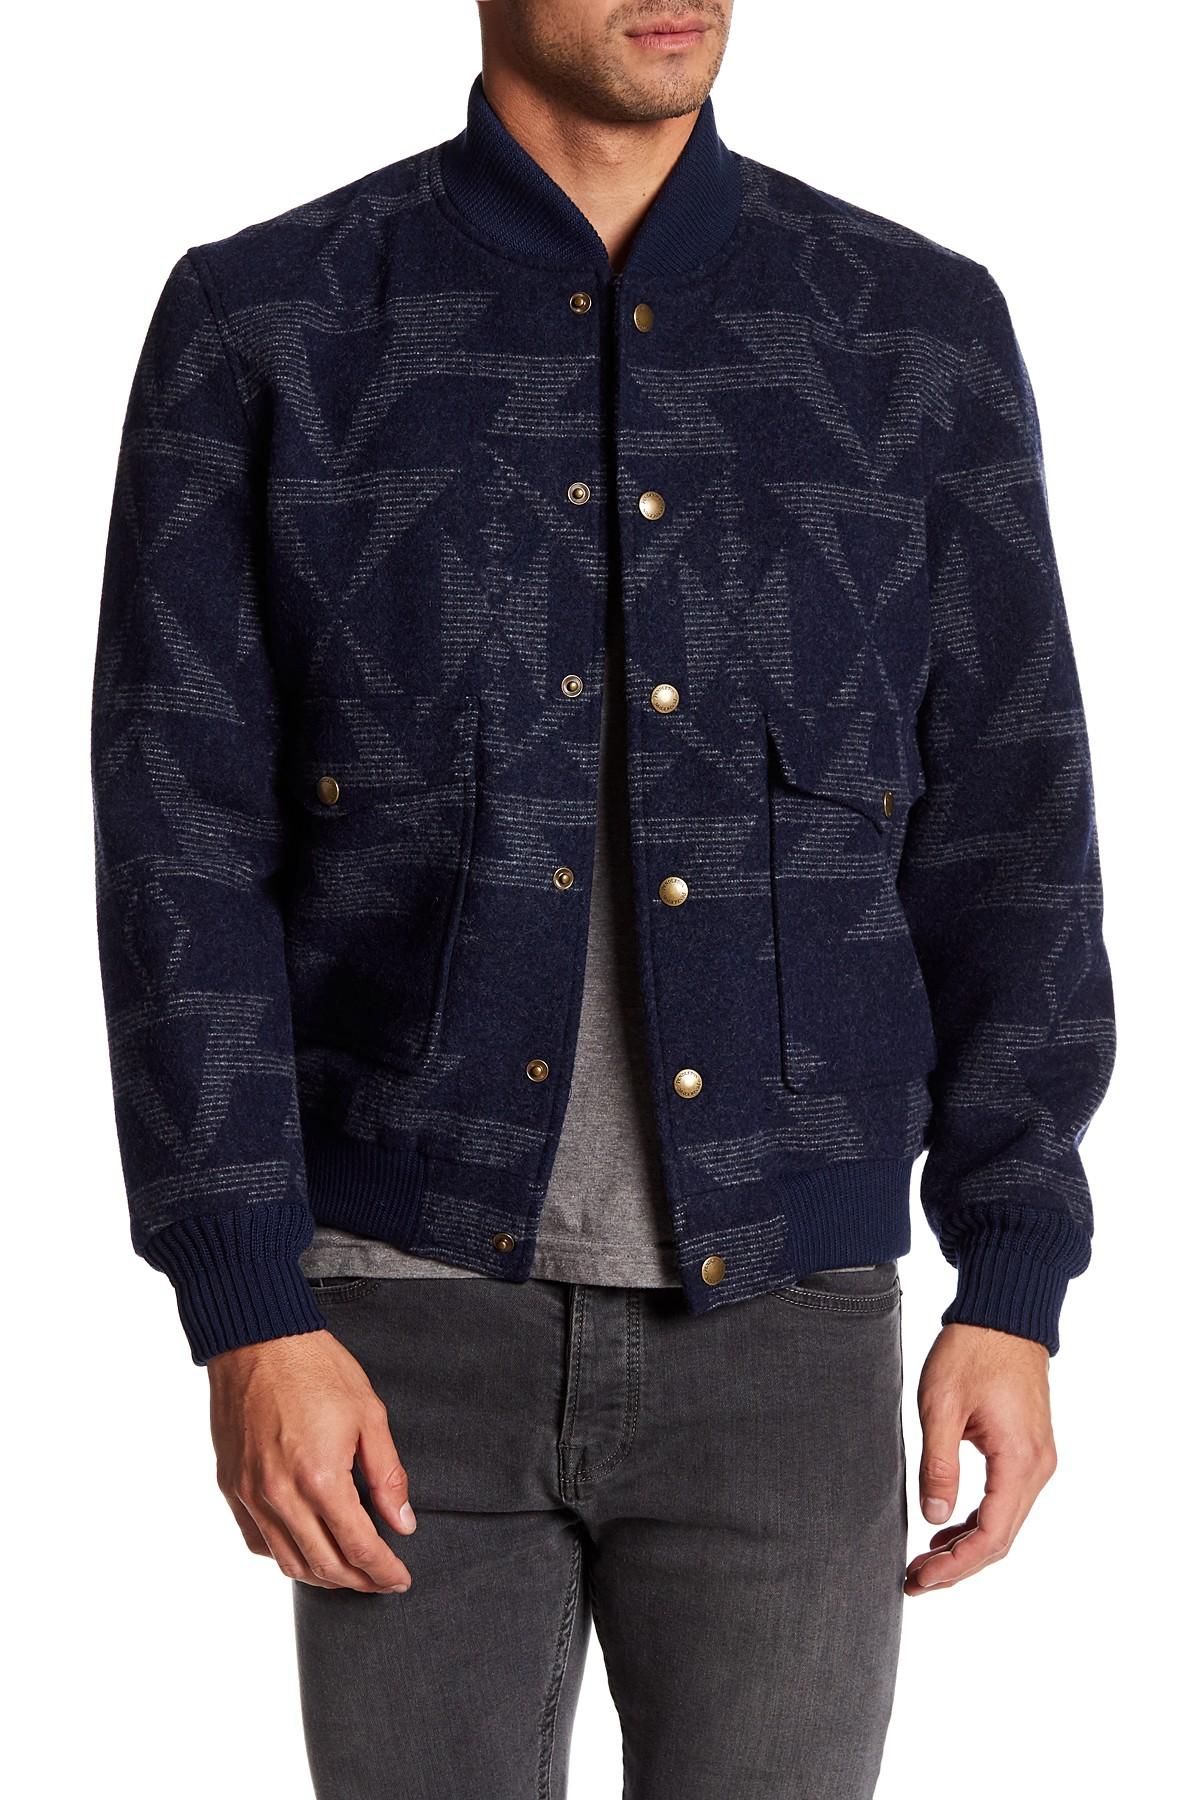 Pendleton The Gorge Wool Jacket in Blue for Men - Lyst